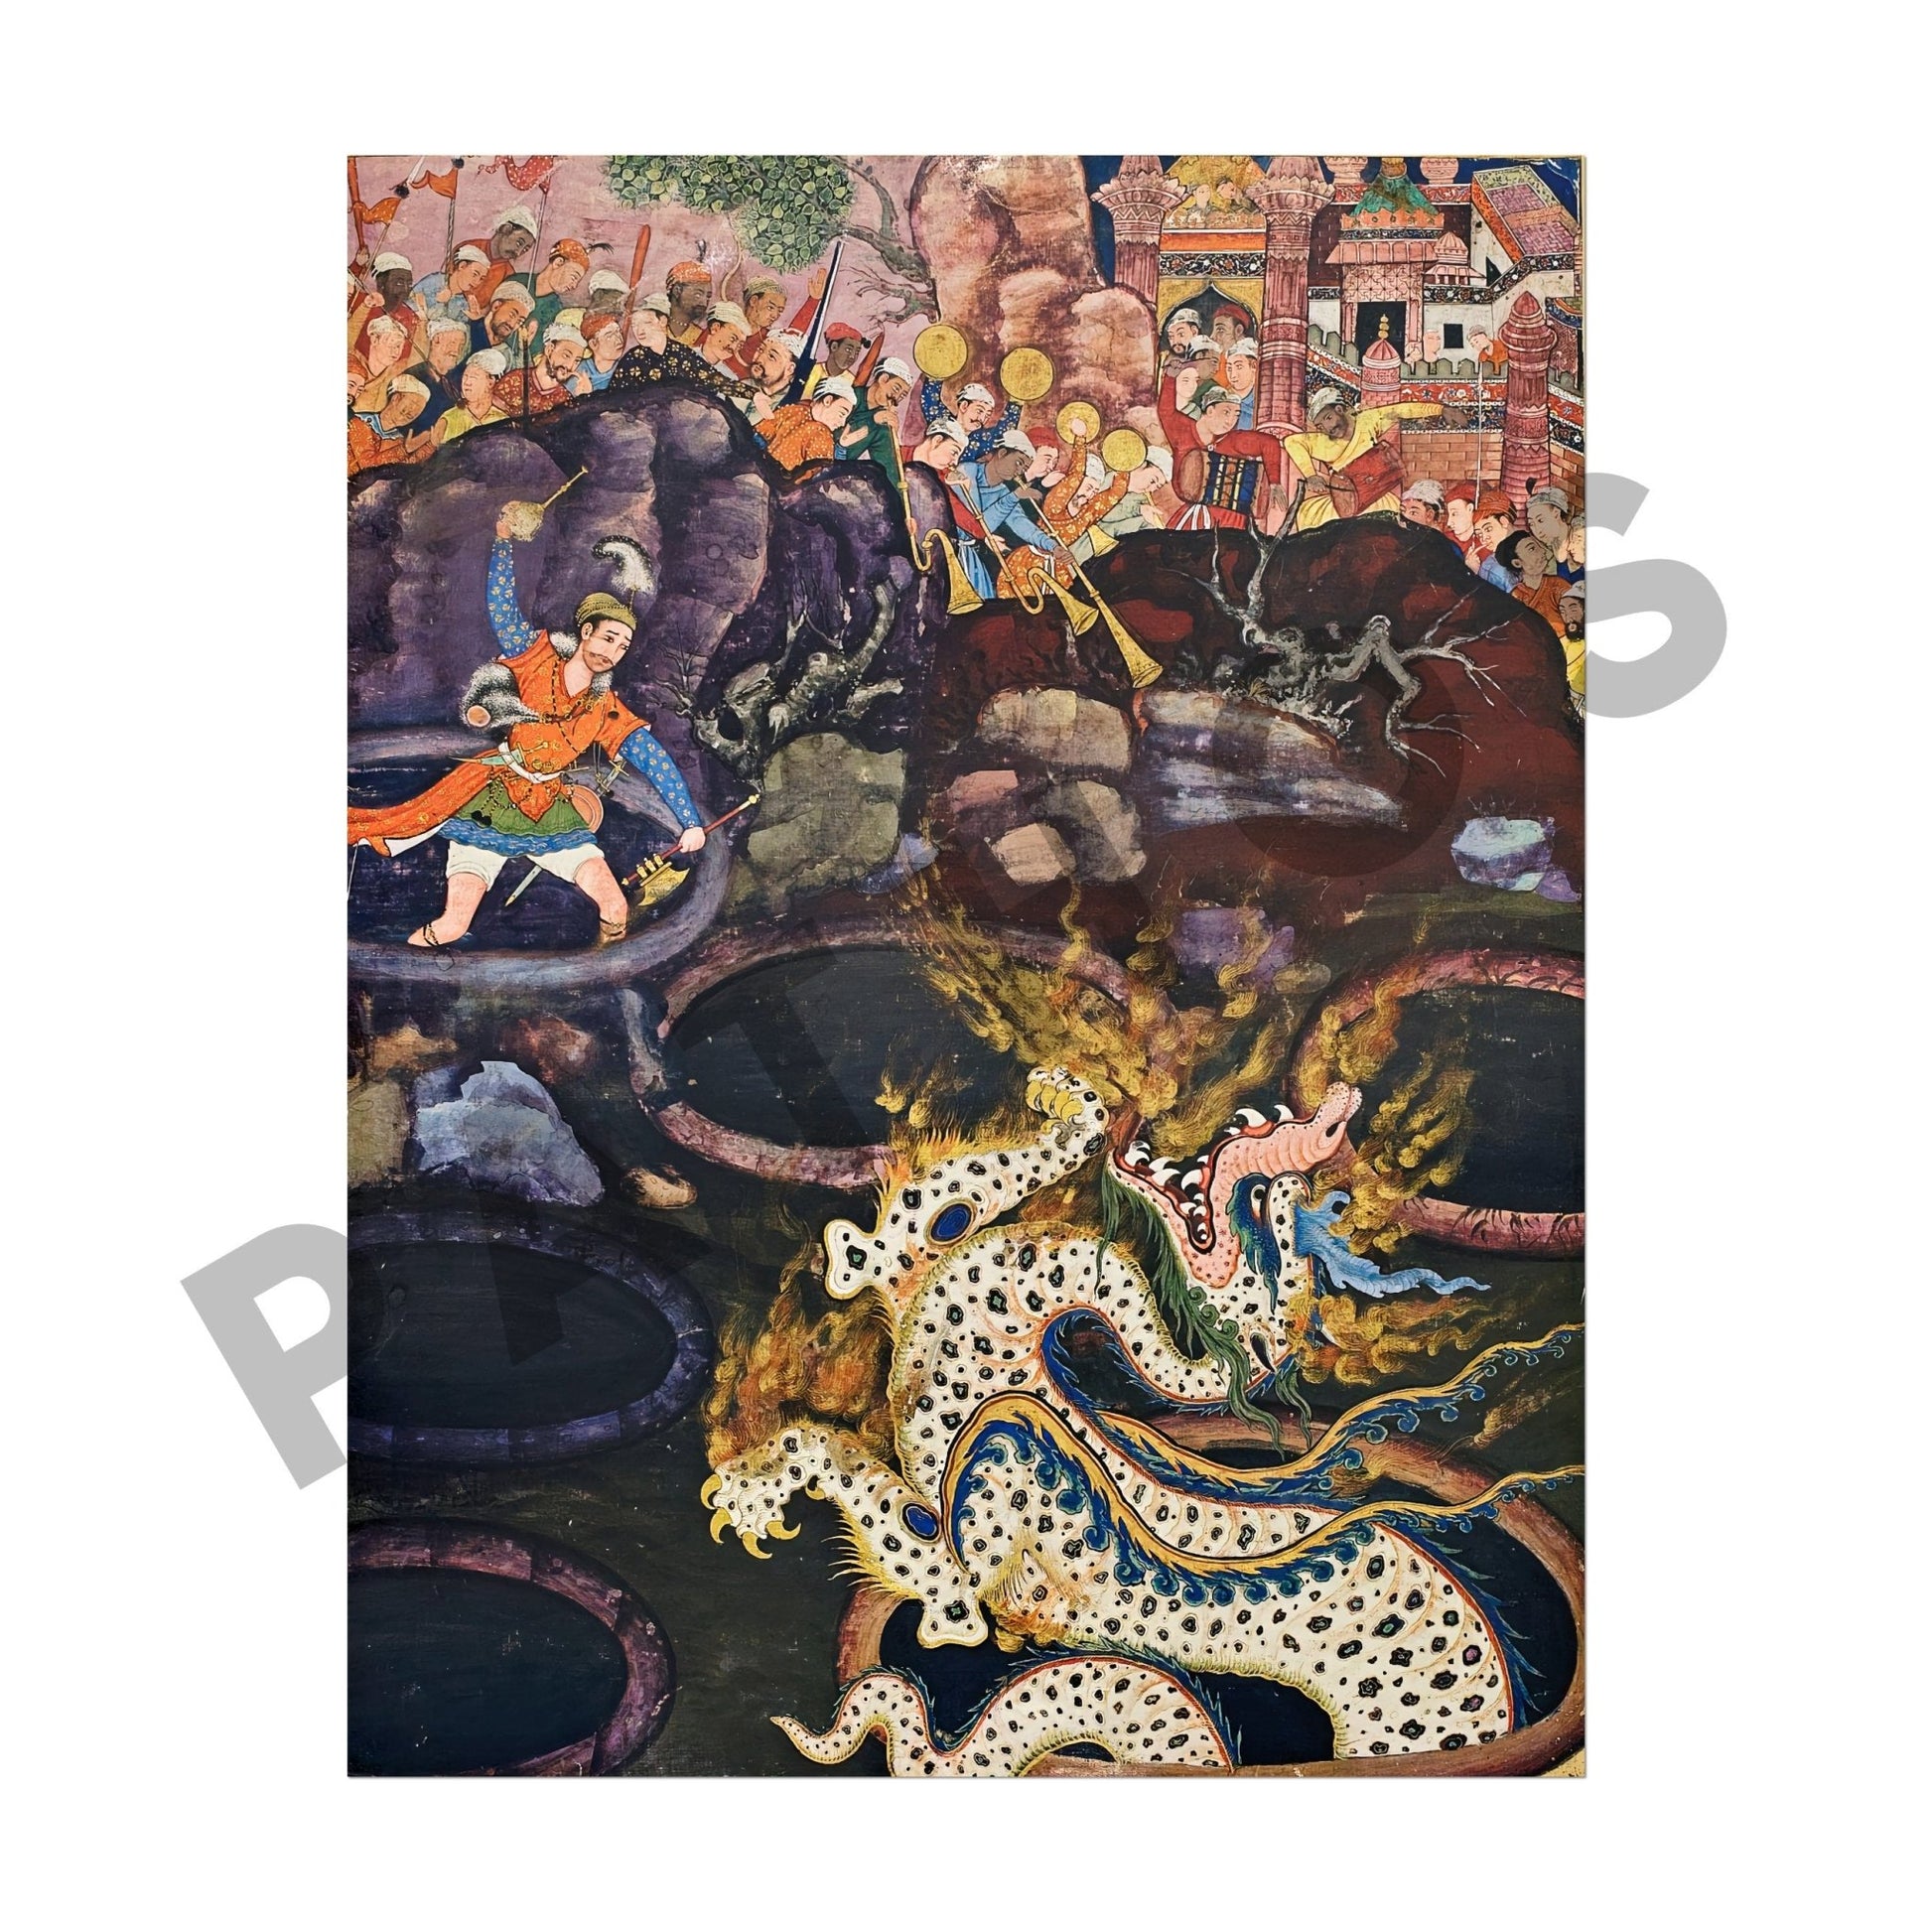 Set of 3 - Traditional Persian Art featuring Mythical Creatures - Pathos Studio - Posters, Prints, & Visual Artwork